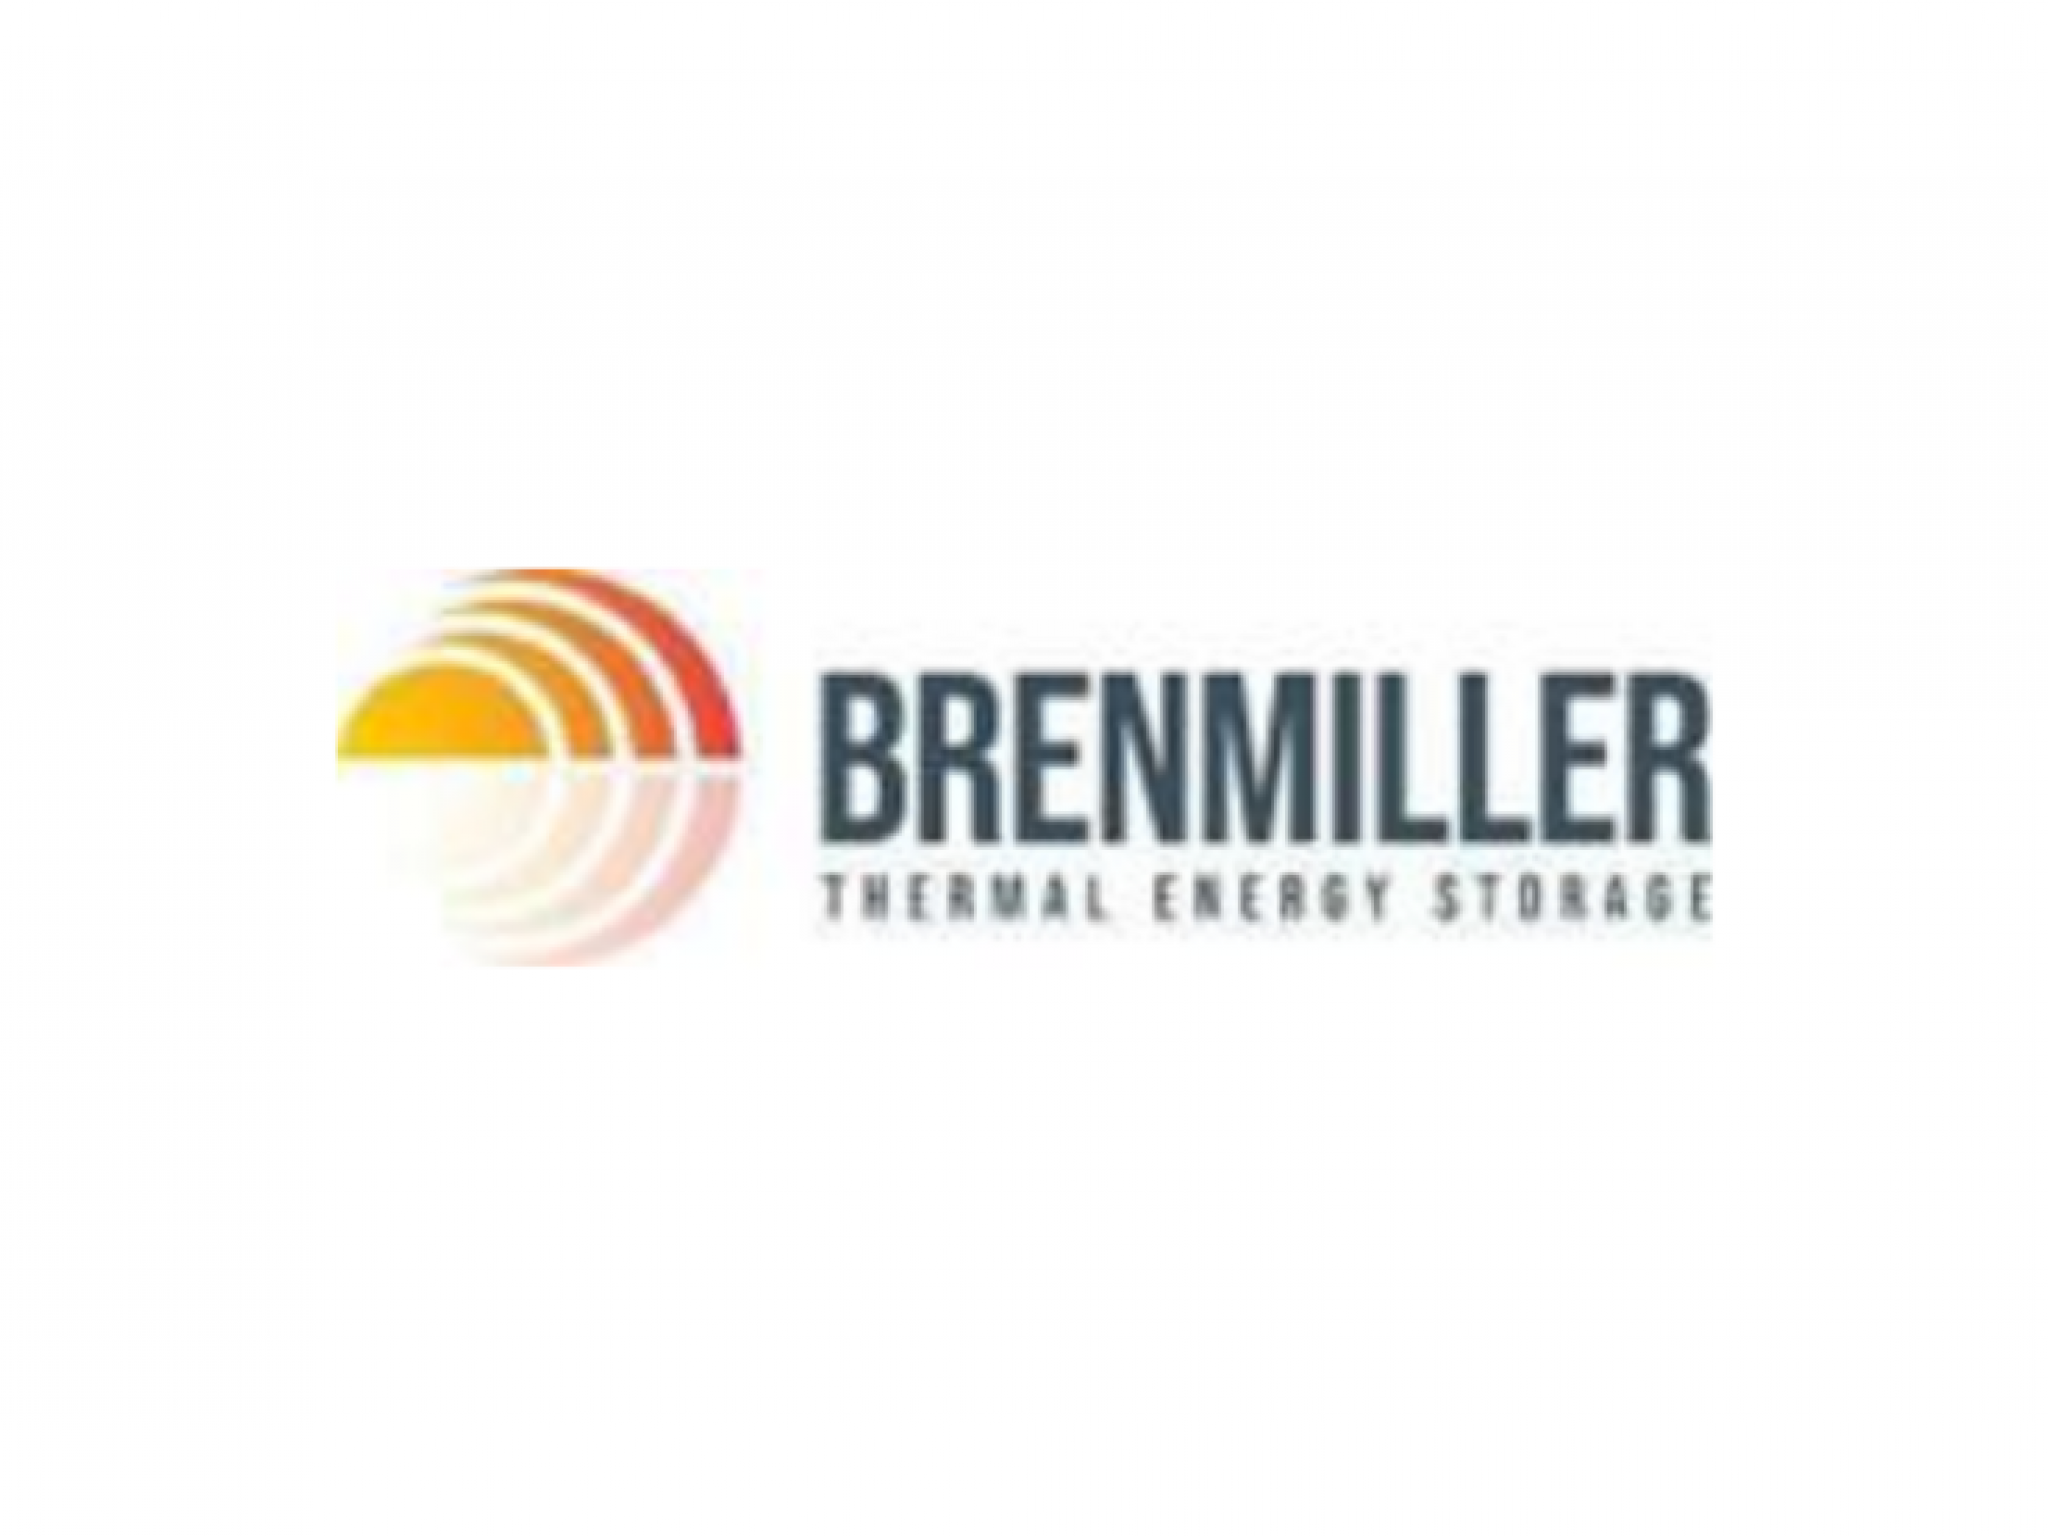  brenmiller-energy-shares-skyrocket-poised-for-major-growth-with-solid-project-pipeline 